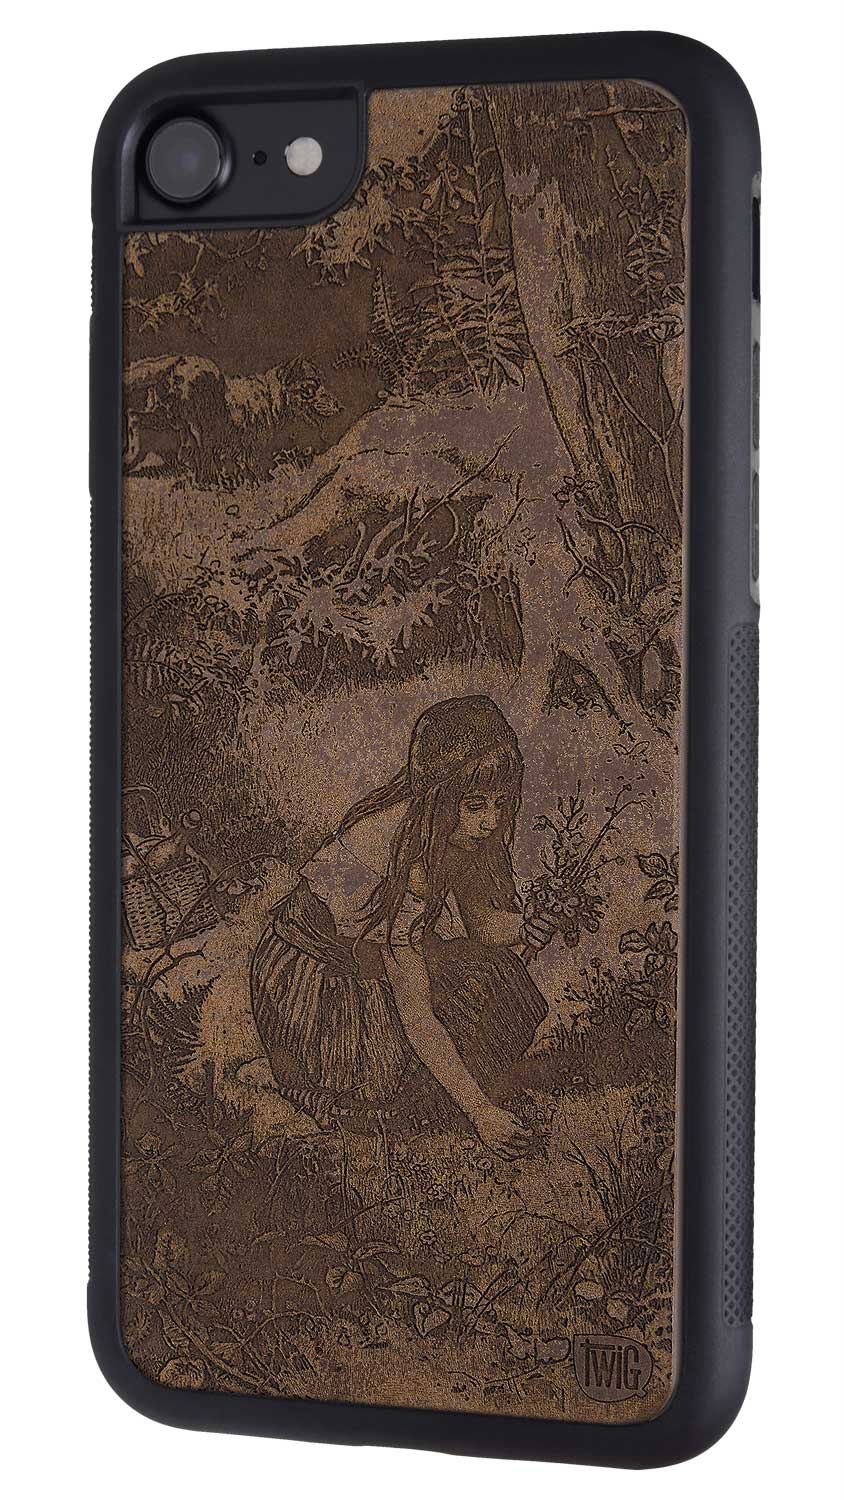 Red Riding Hood - Color Paper iPhone Case, iPhone Case - Twig Case Co.